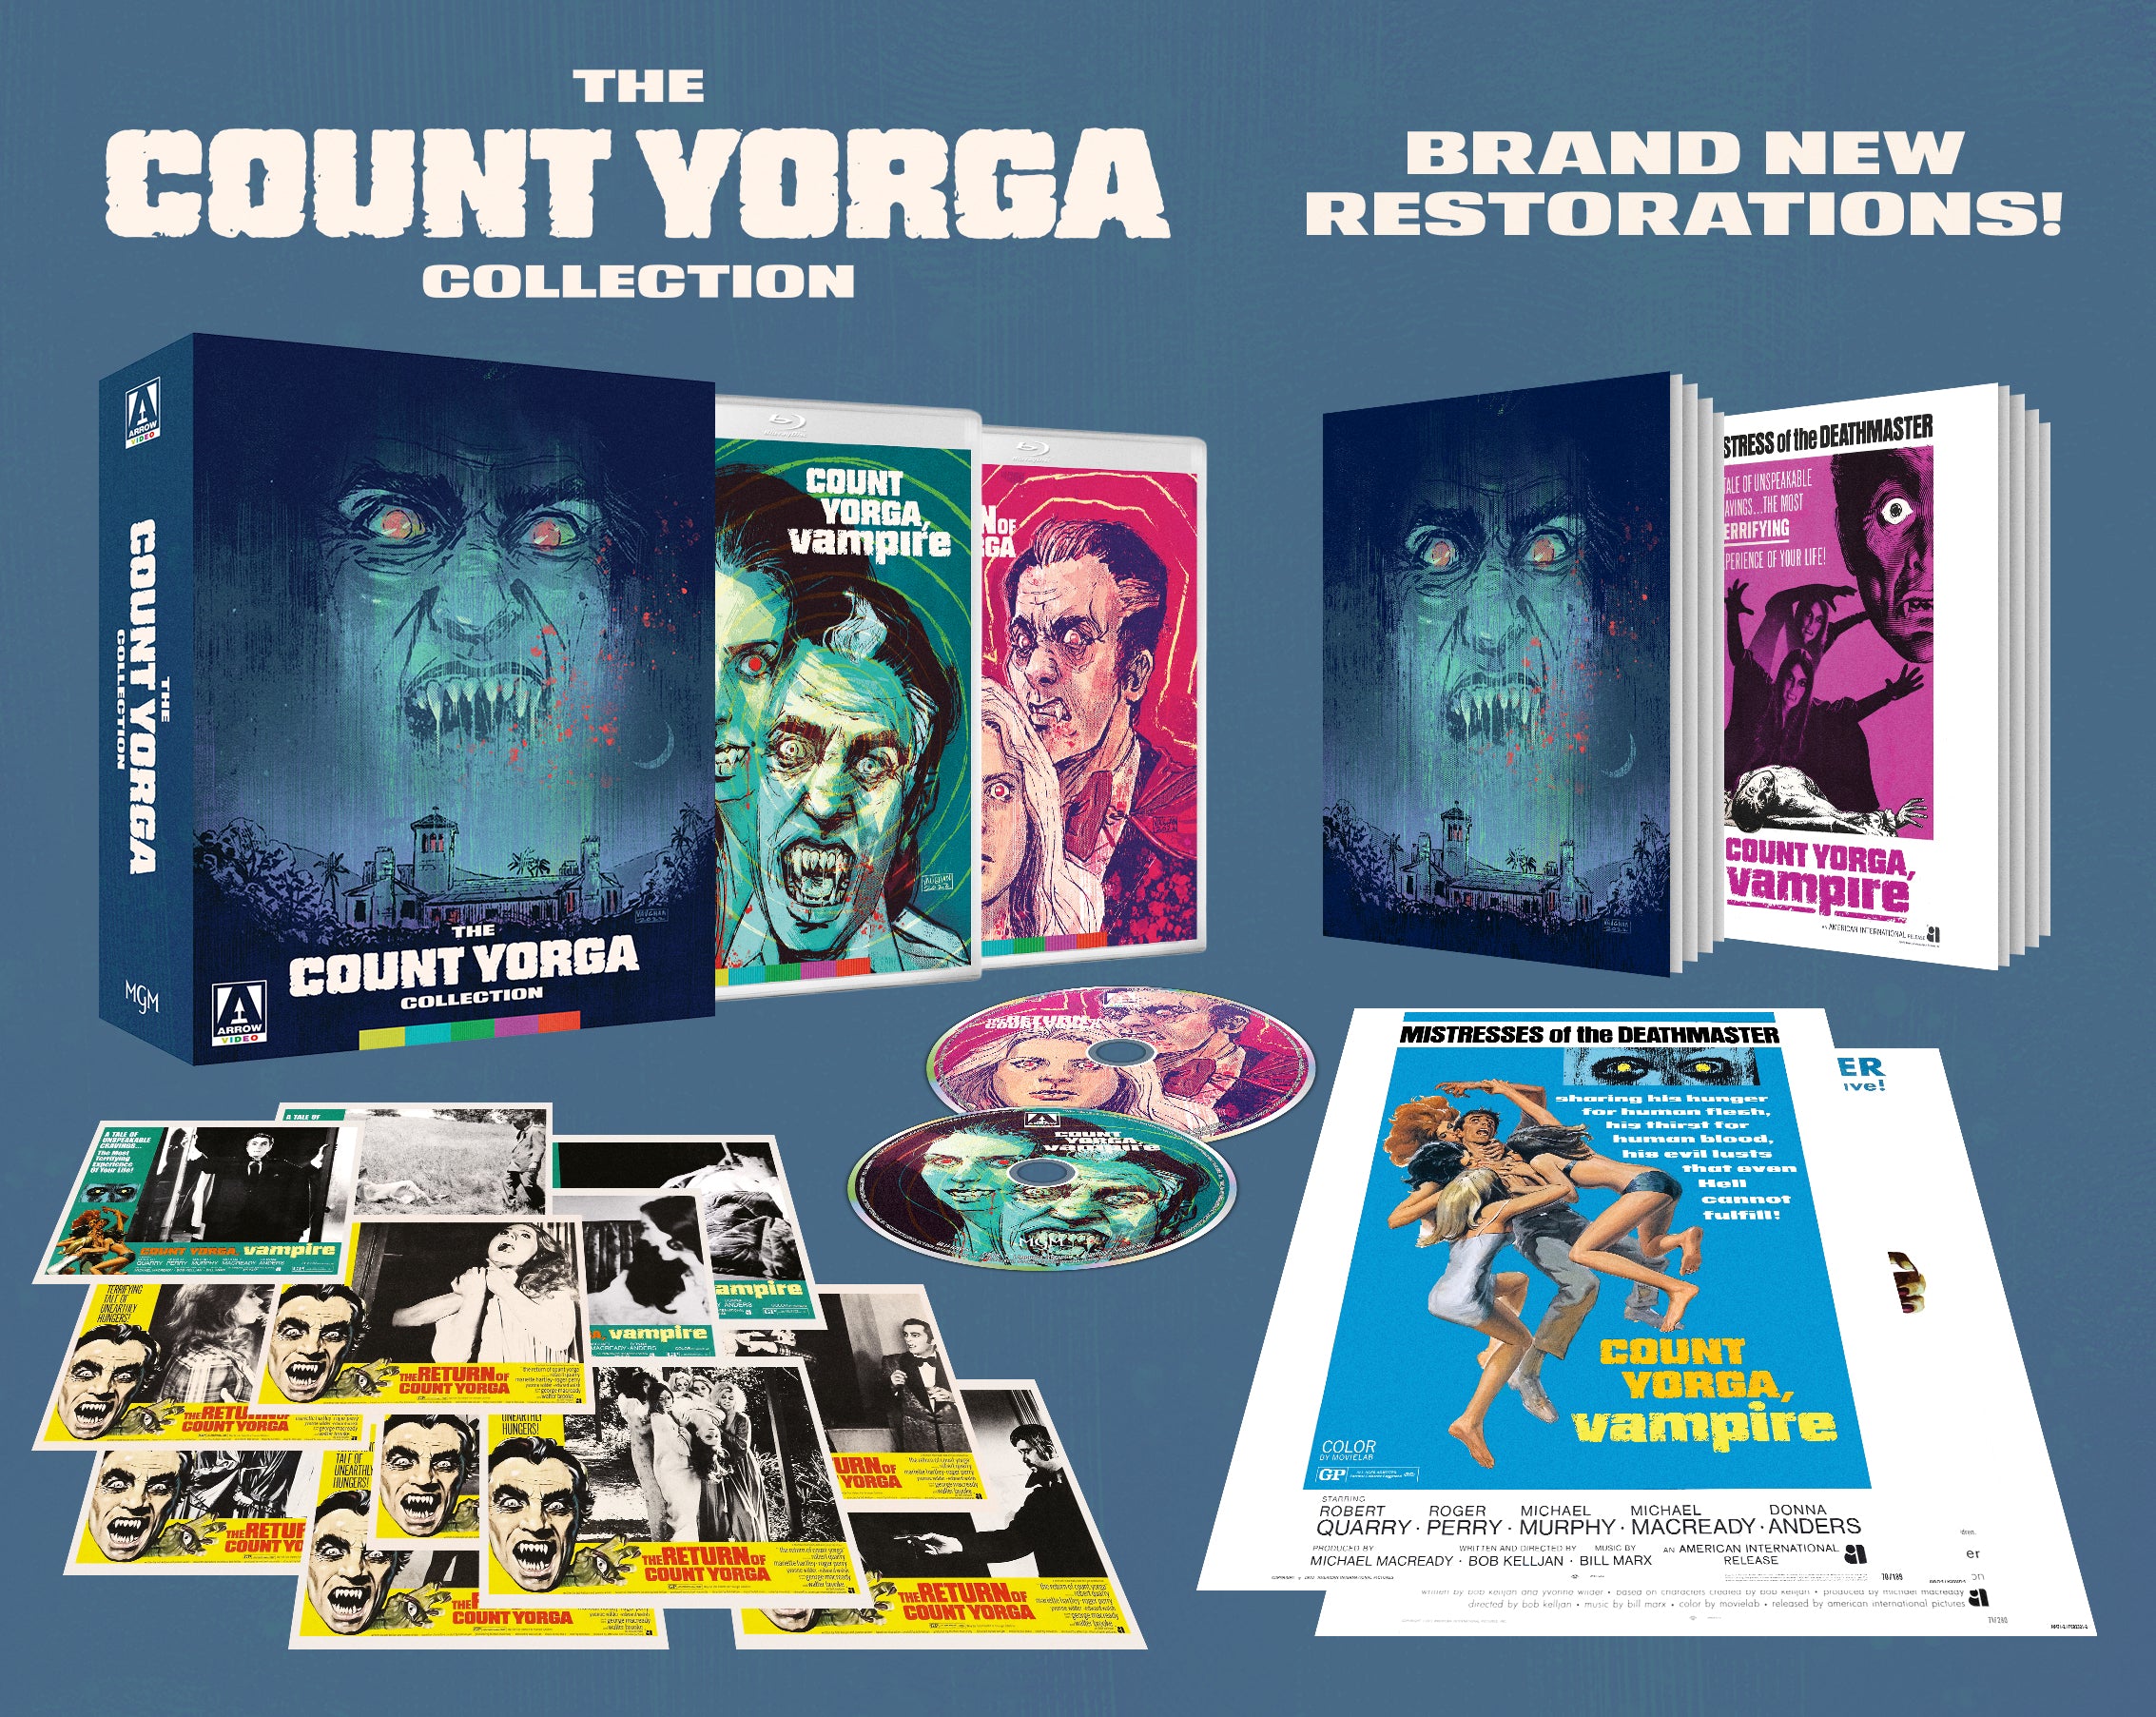 THE COUNT YORGA COLLECTION (LIMITED EDITION) BLU-RAY